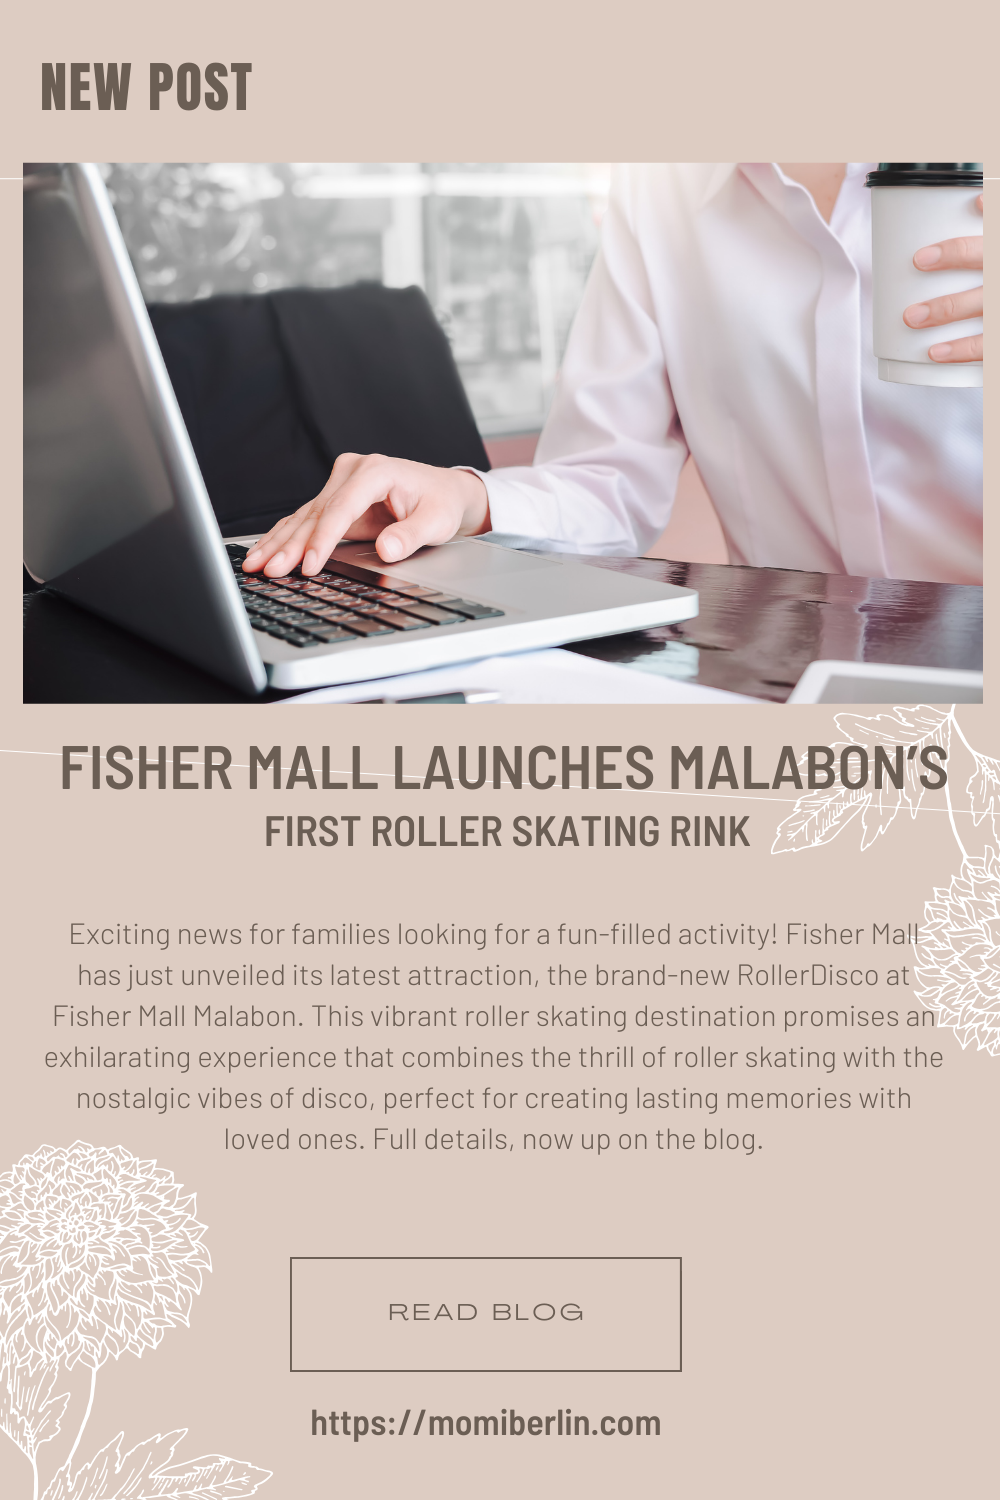 Fisher Mall Launches Malabon’s First Roller Skating Rink